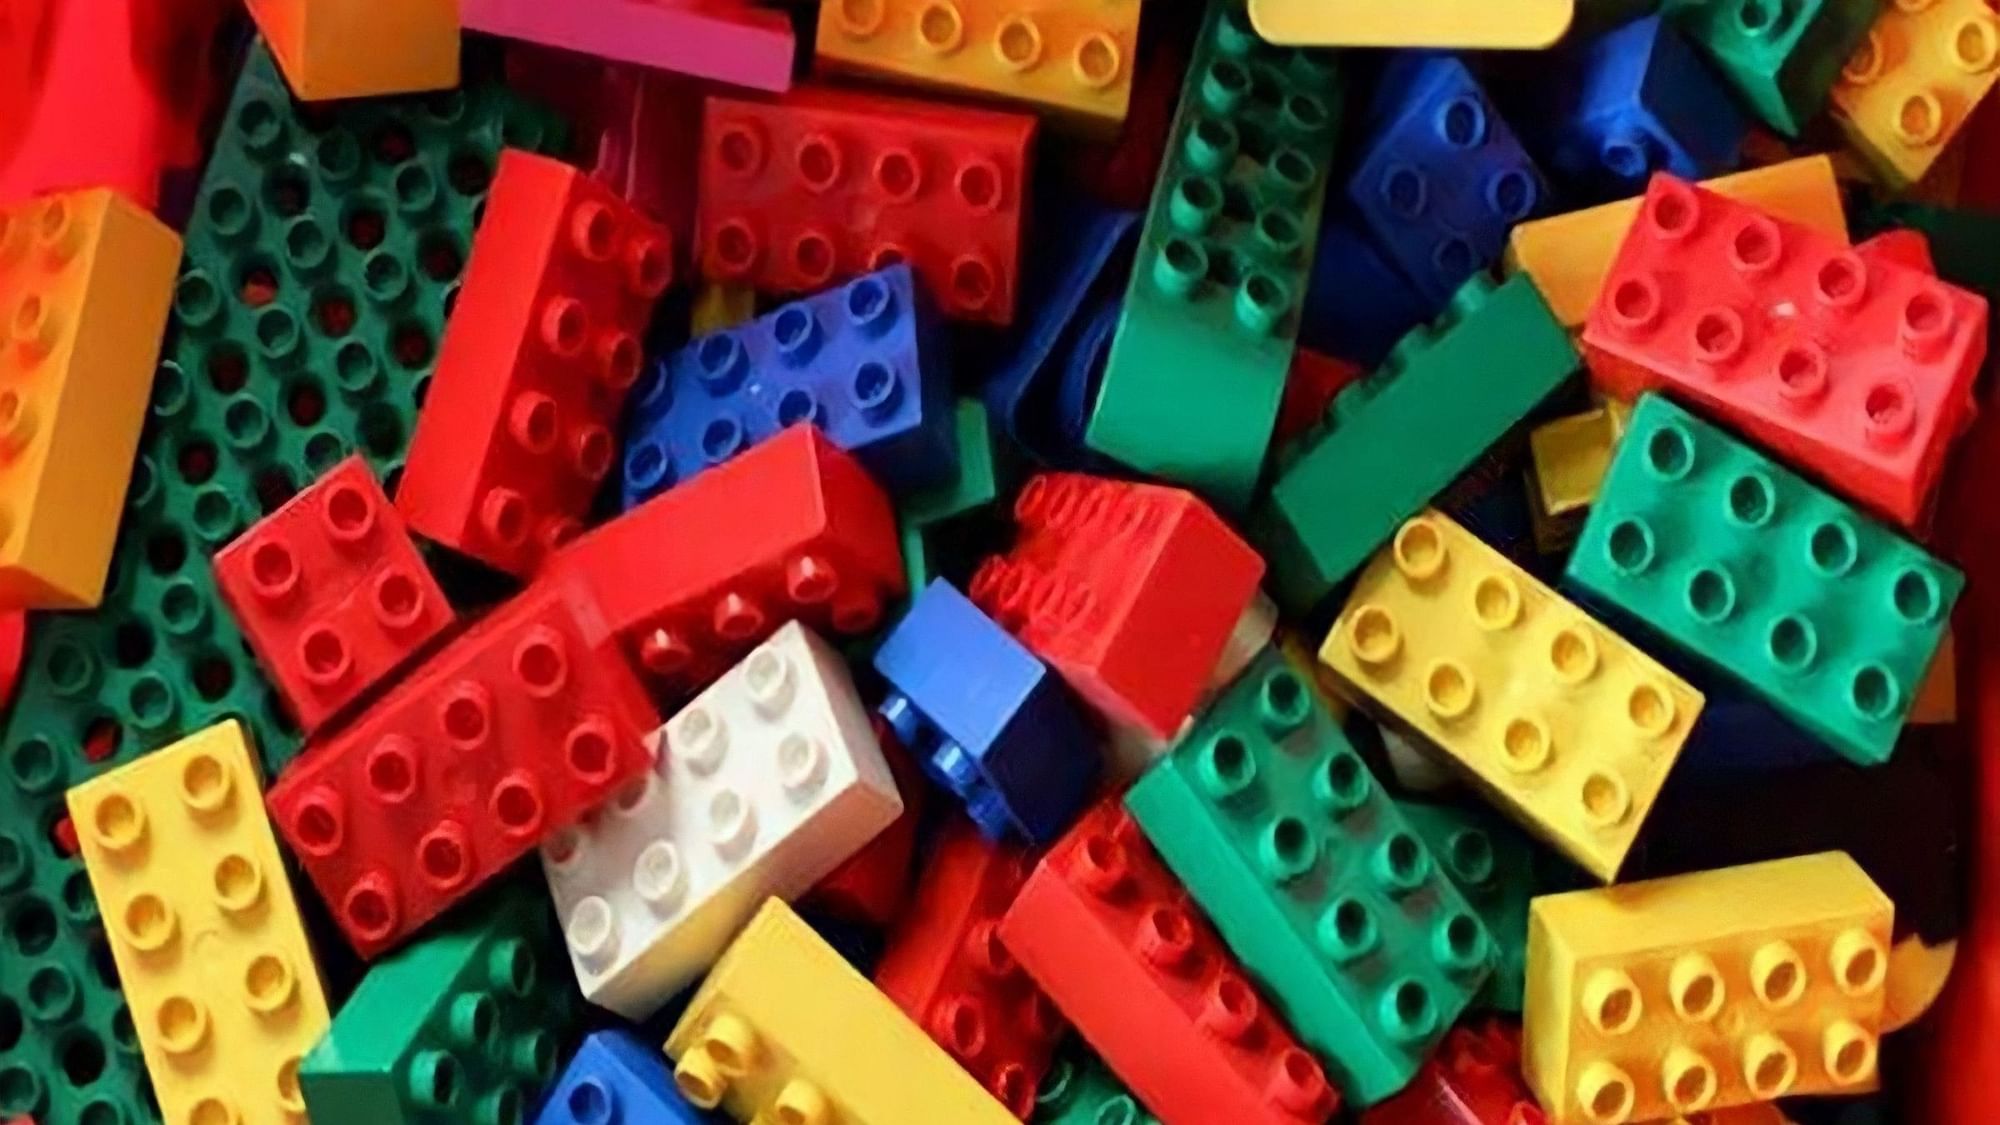 <div class="paragraphs"><p>LEGO pledged to make playing inclusive for children by ensuring its products are free of gender bias and "harmful stereotypes". Image used for representation.</p></div>